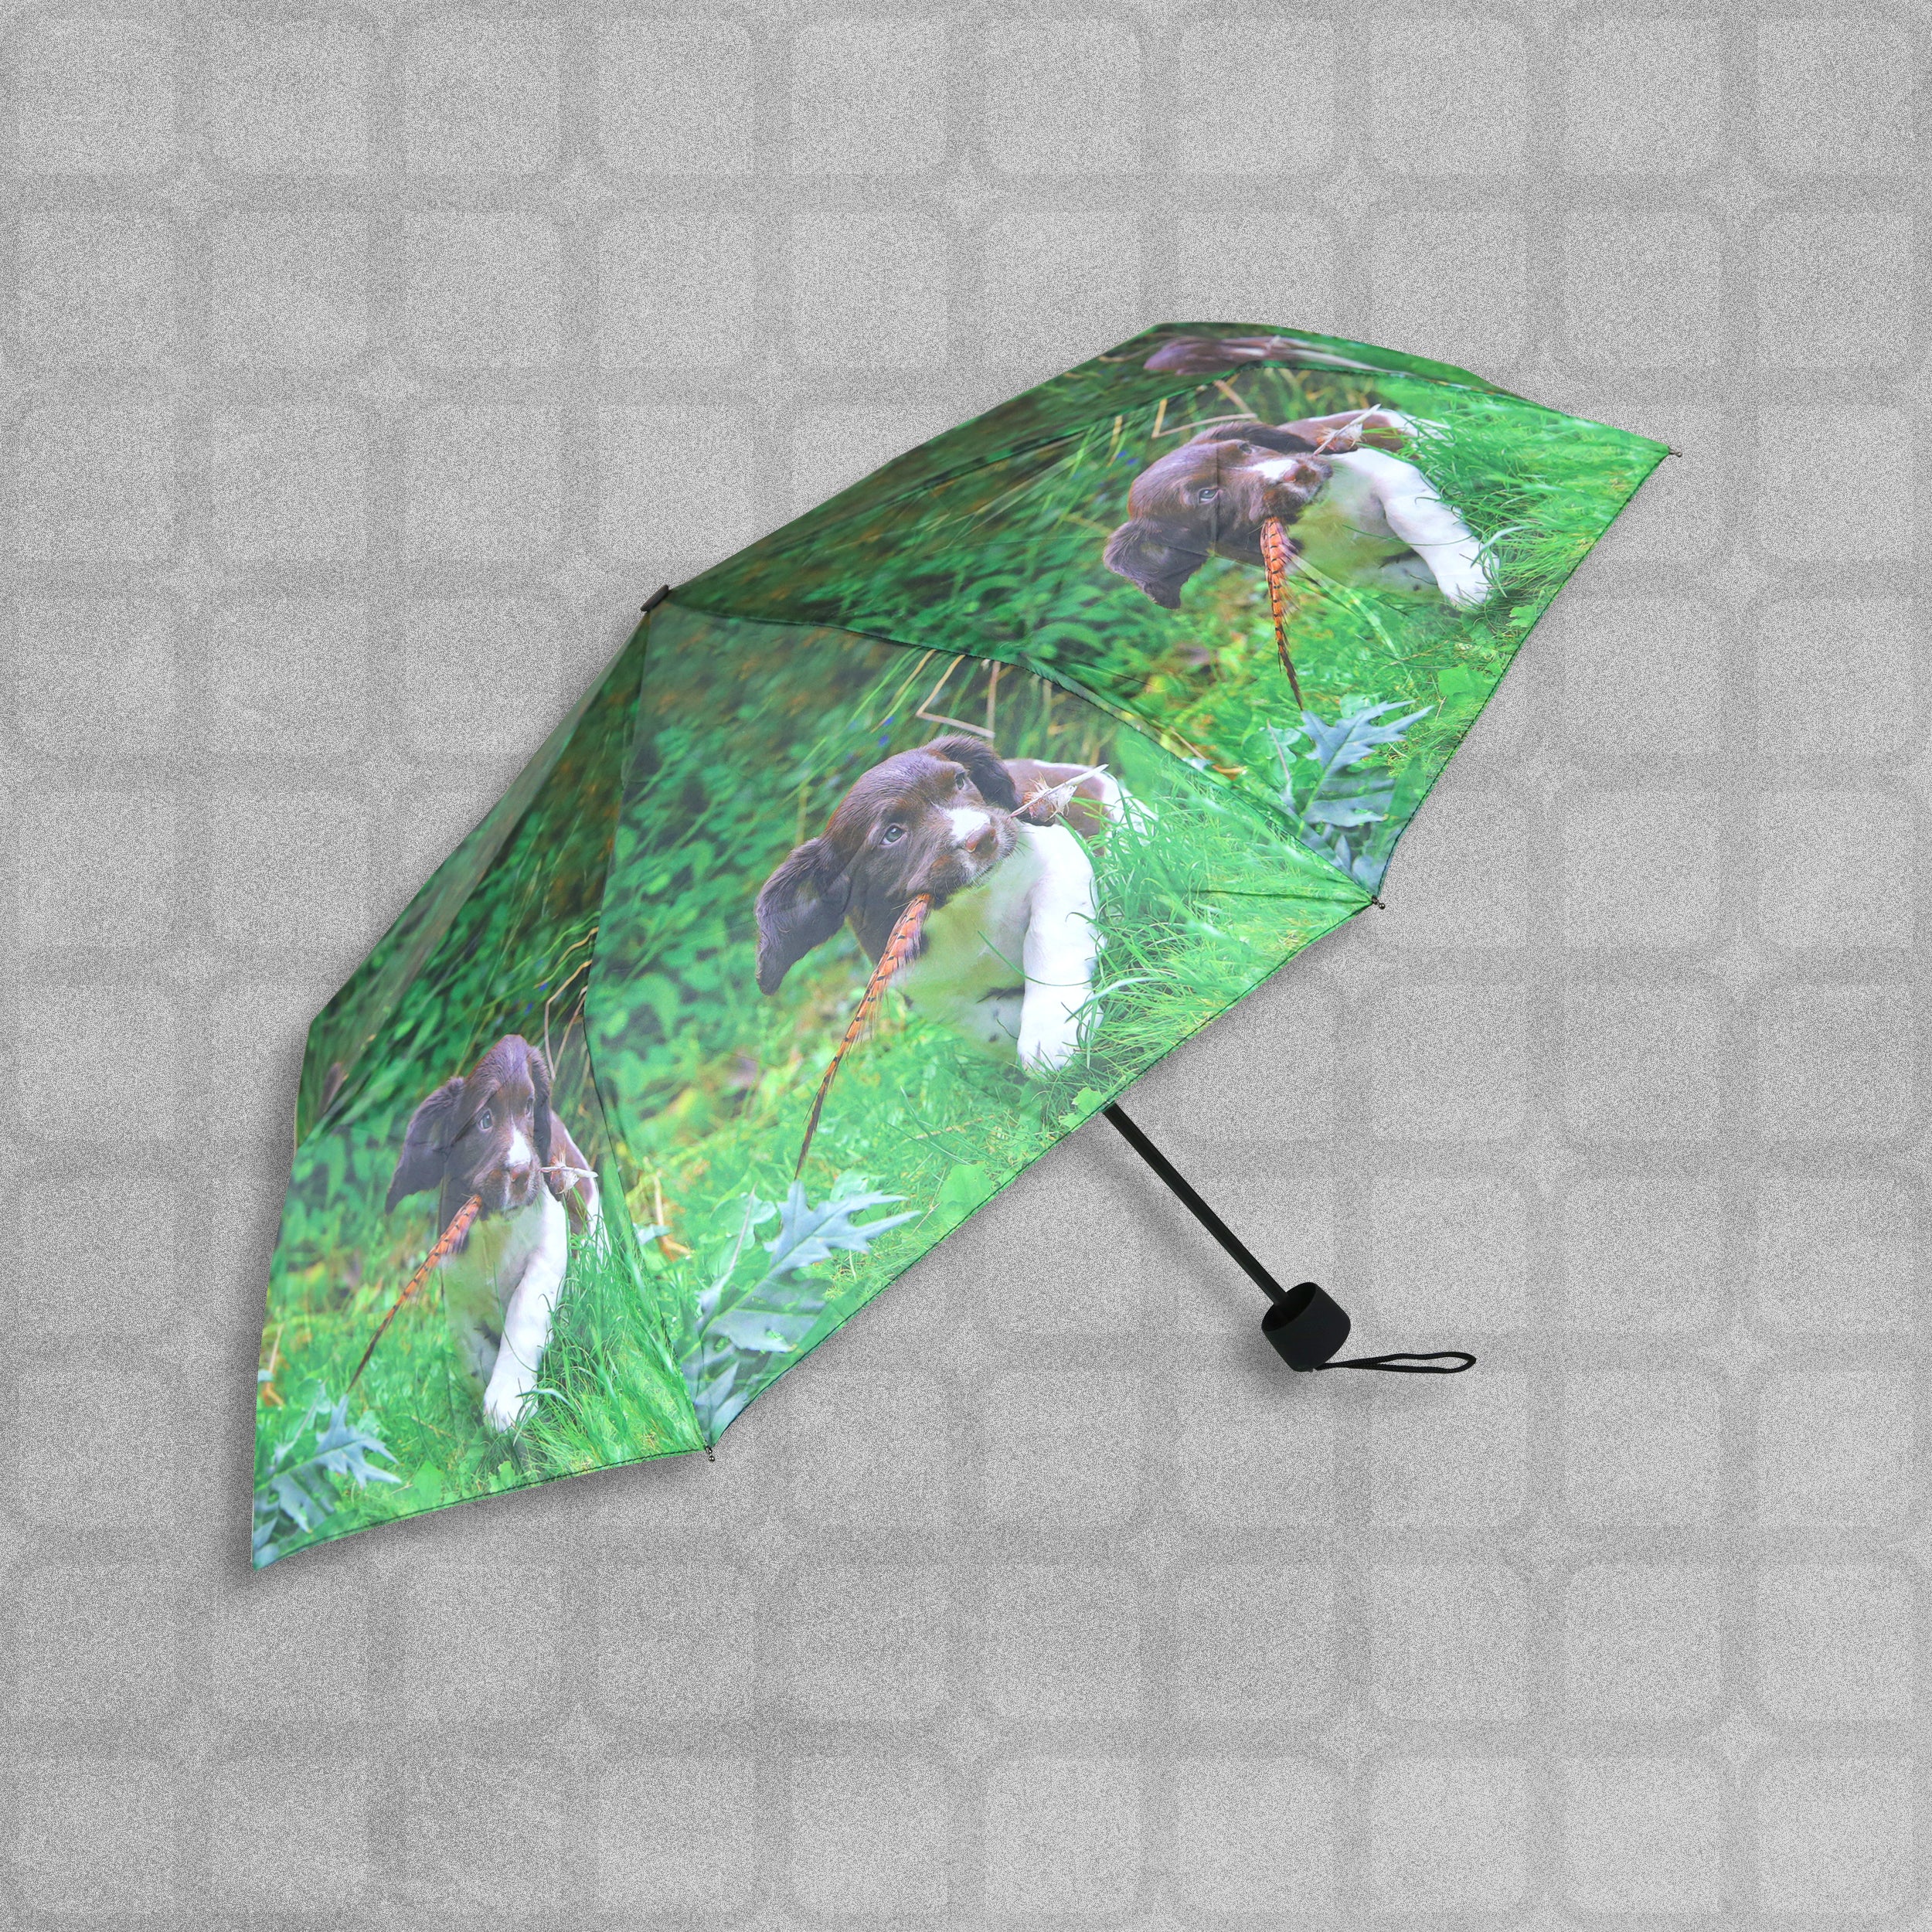 Country Matters Telescopic and Folding Umbrella - 'Up to Mischief' Spaniel Puppy